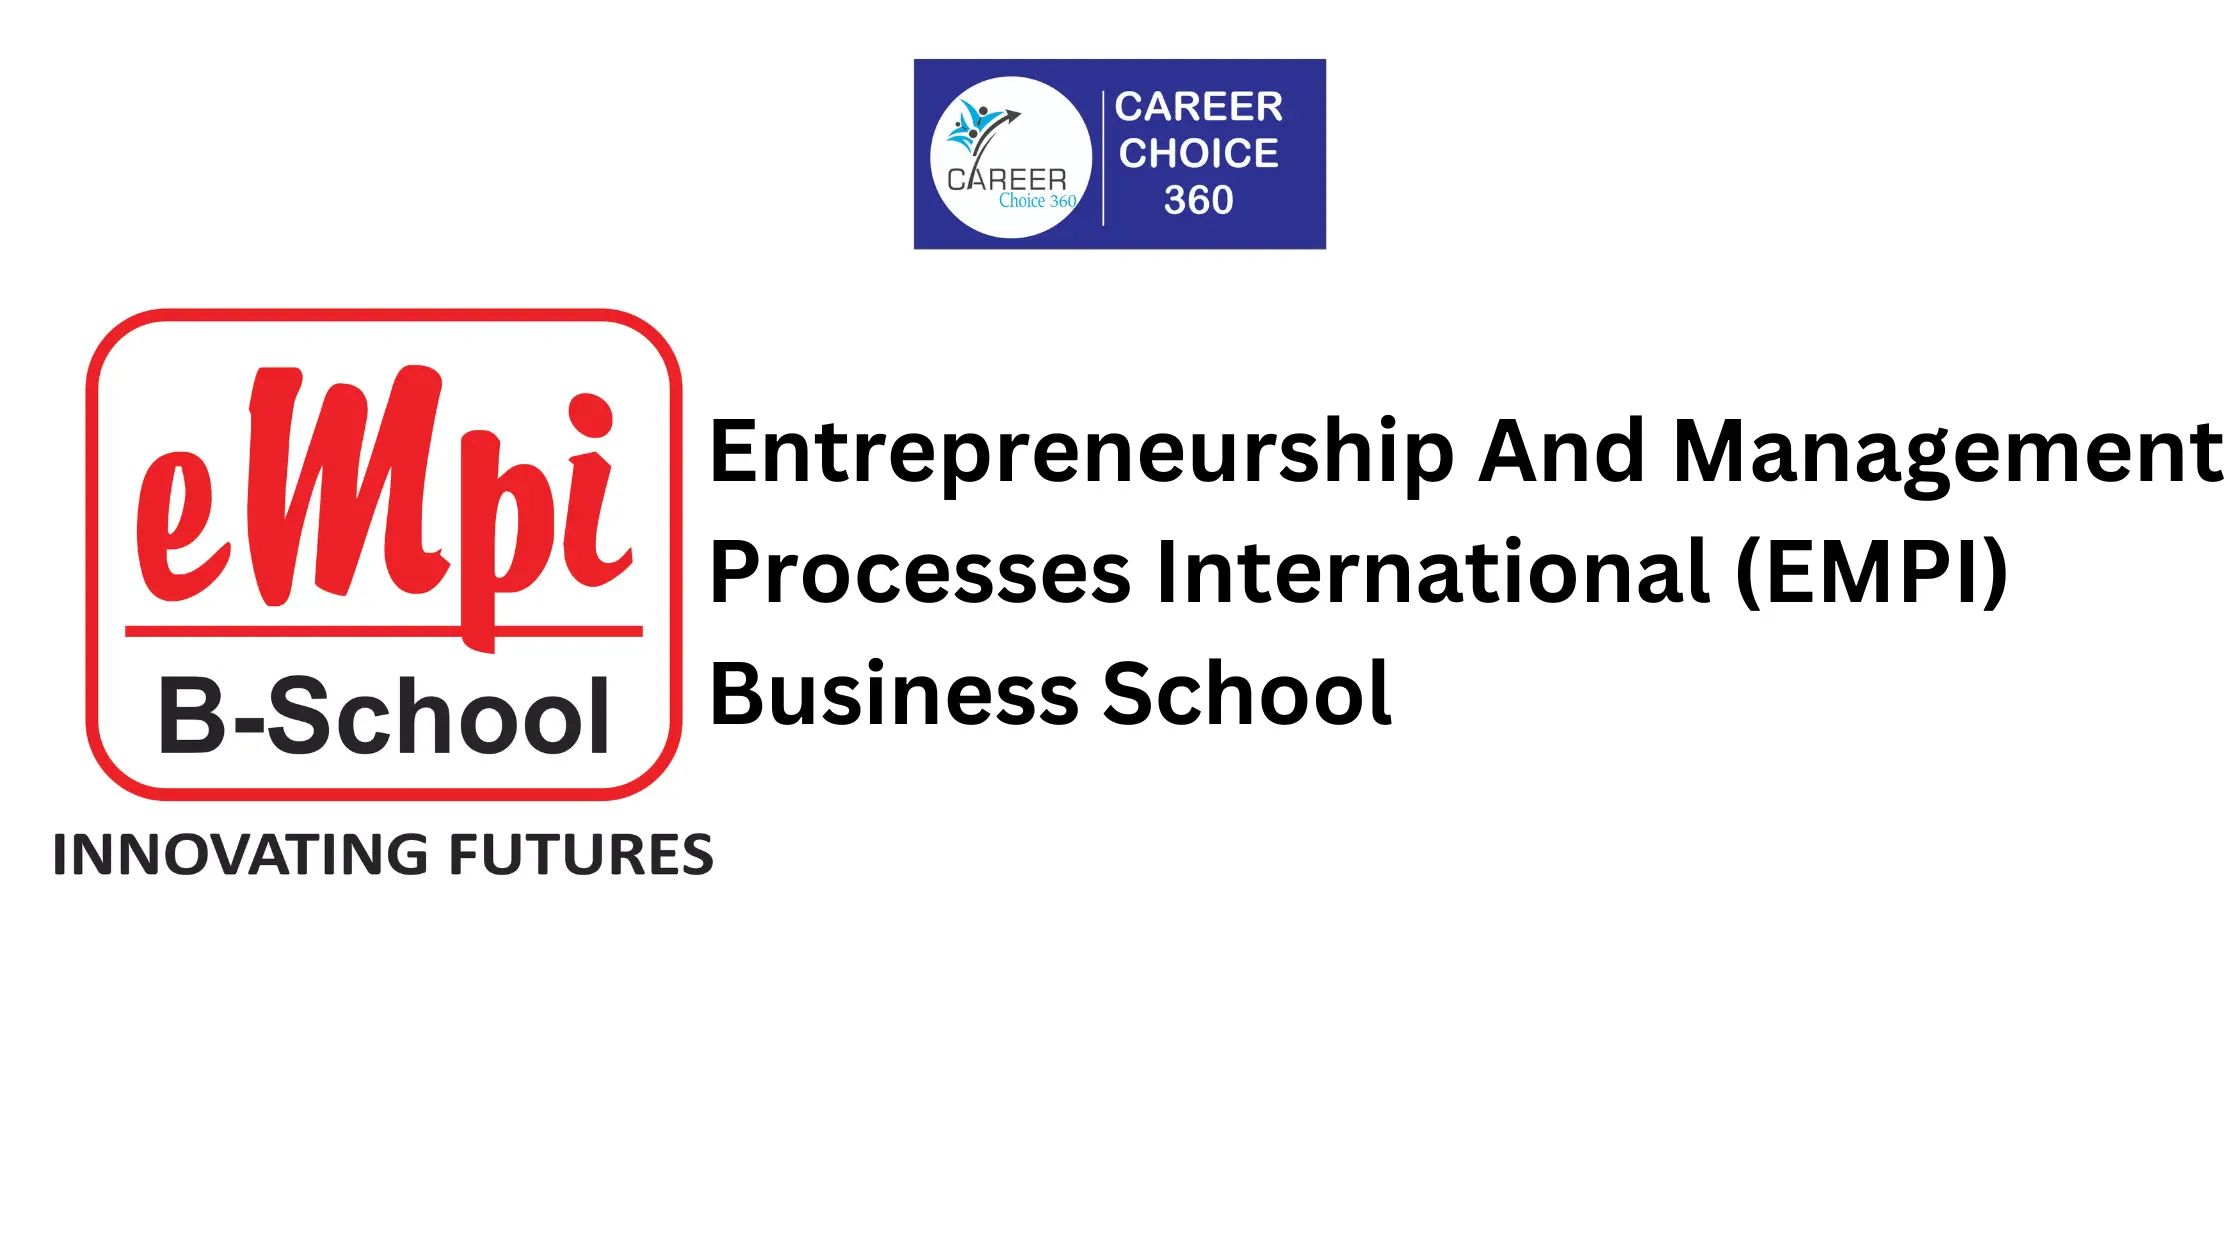 You are currently viewing Entrepreneurship And Management Processes International (EMPI) Business School